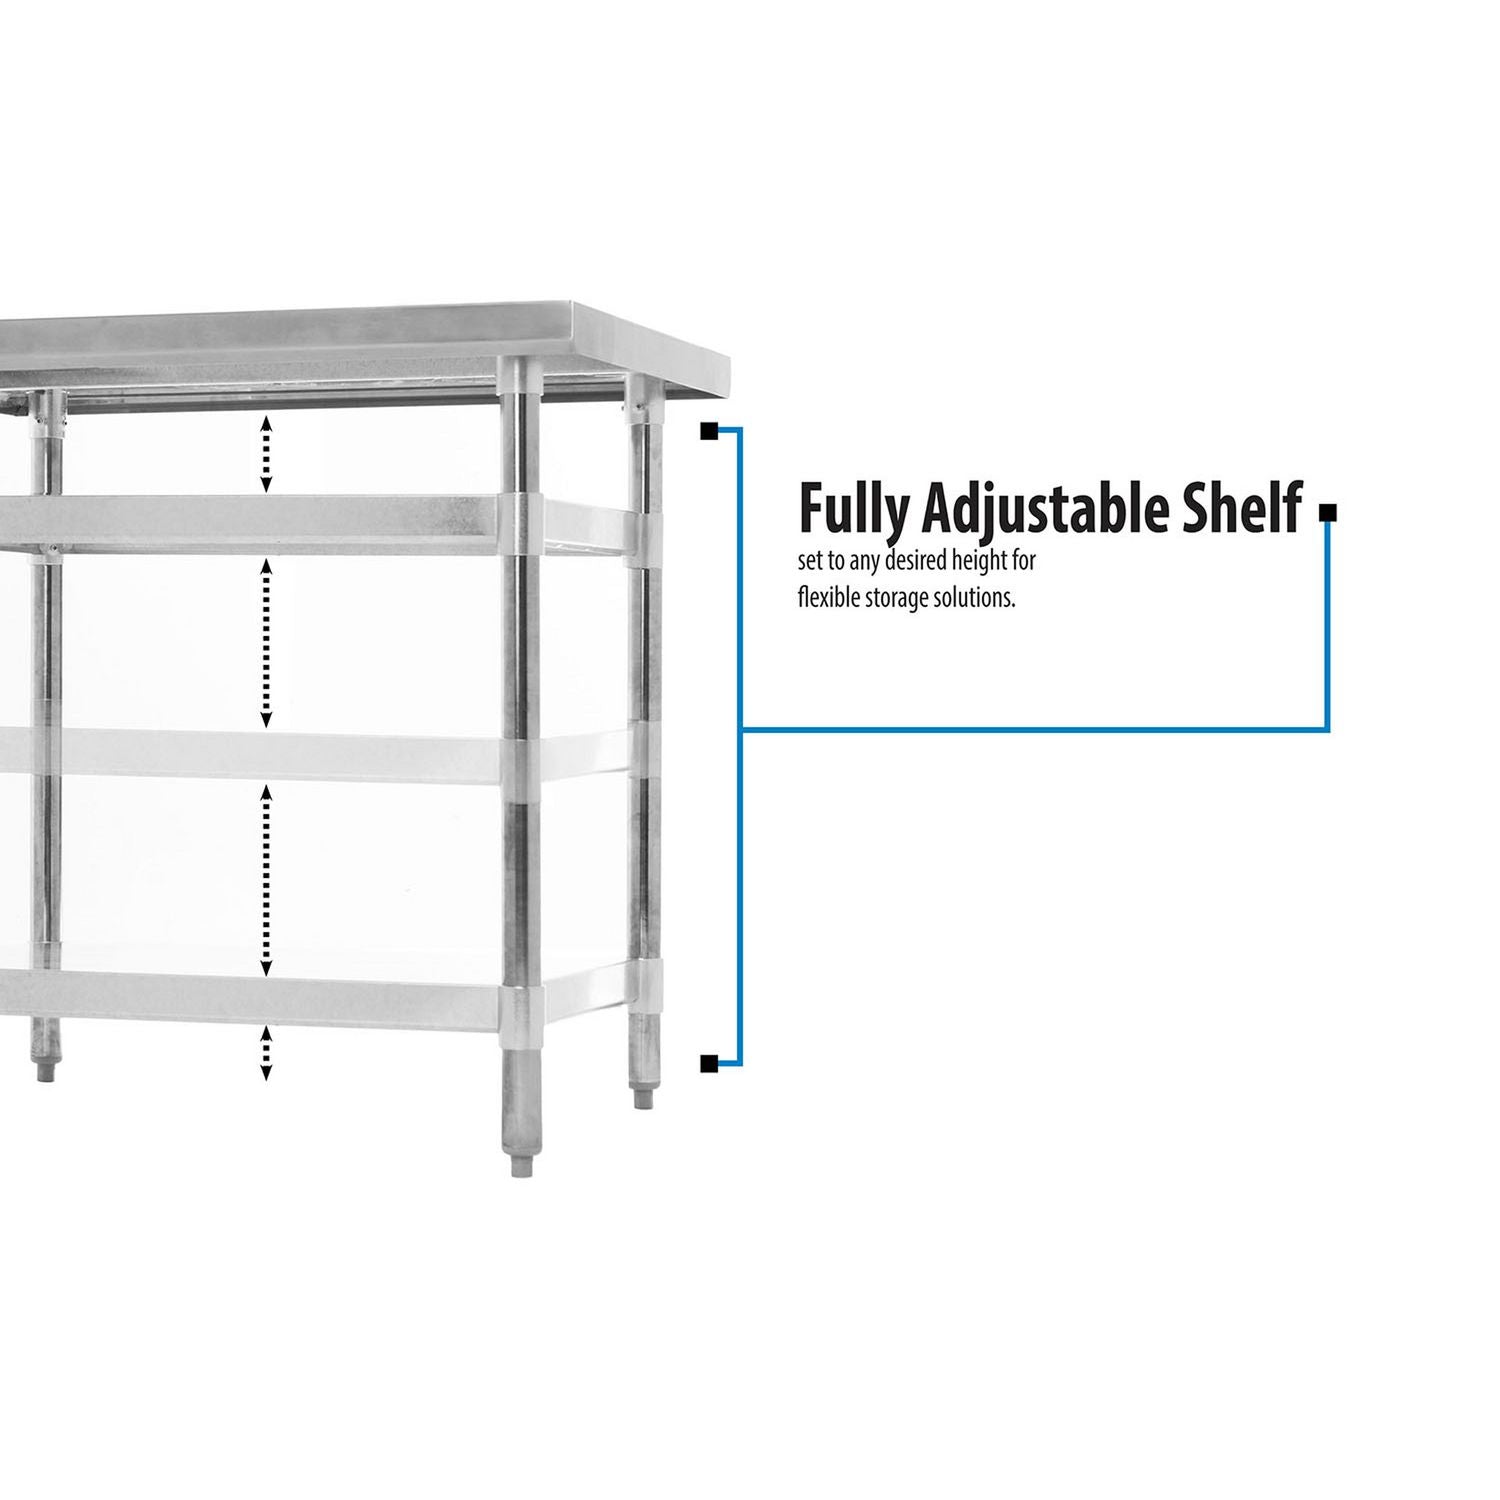 stainless-steel-5-riser-top-tables-60w-x-30d-x-3975h-silver-2-pallet-ships-in-4-6-business-days_bke2vtr56030 - 4